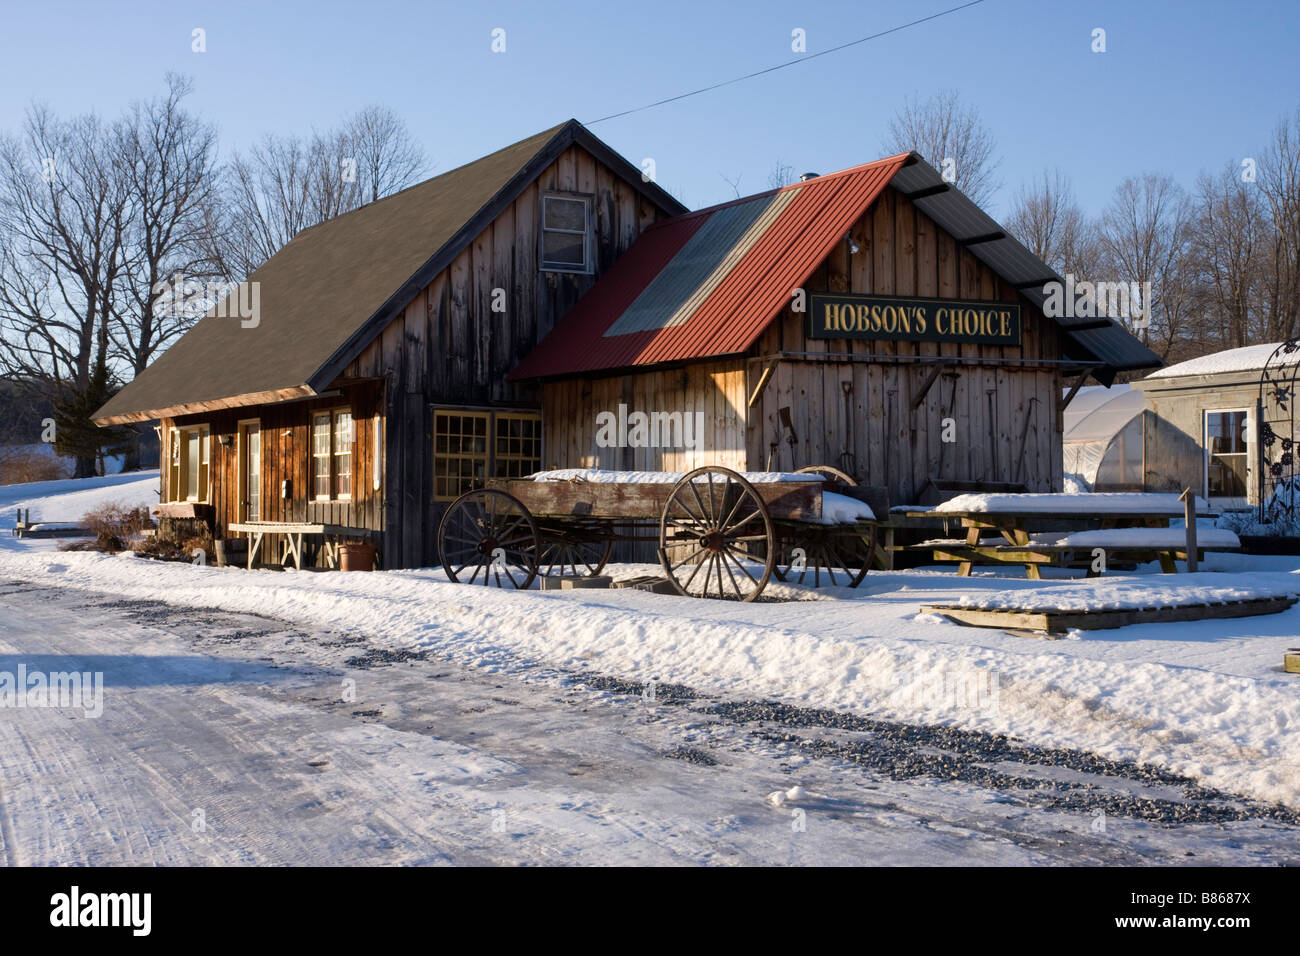 New England barn style building in Vermont Stock Photo